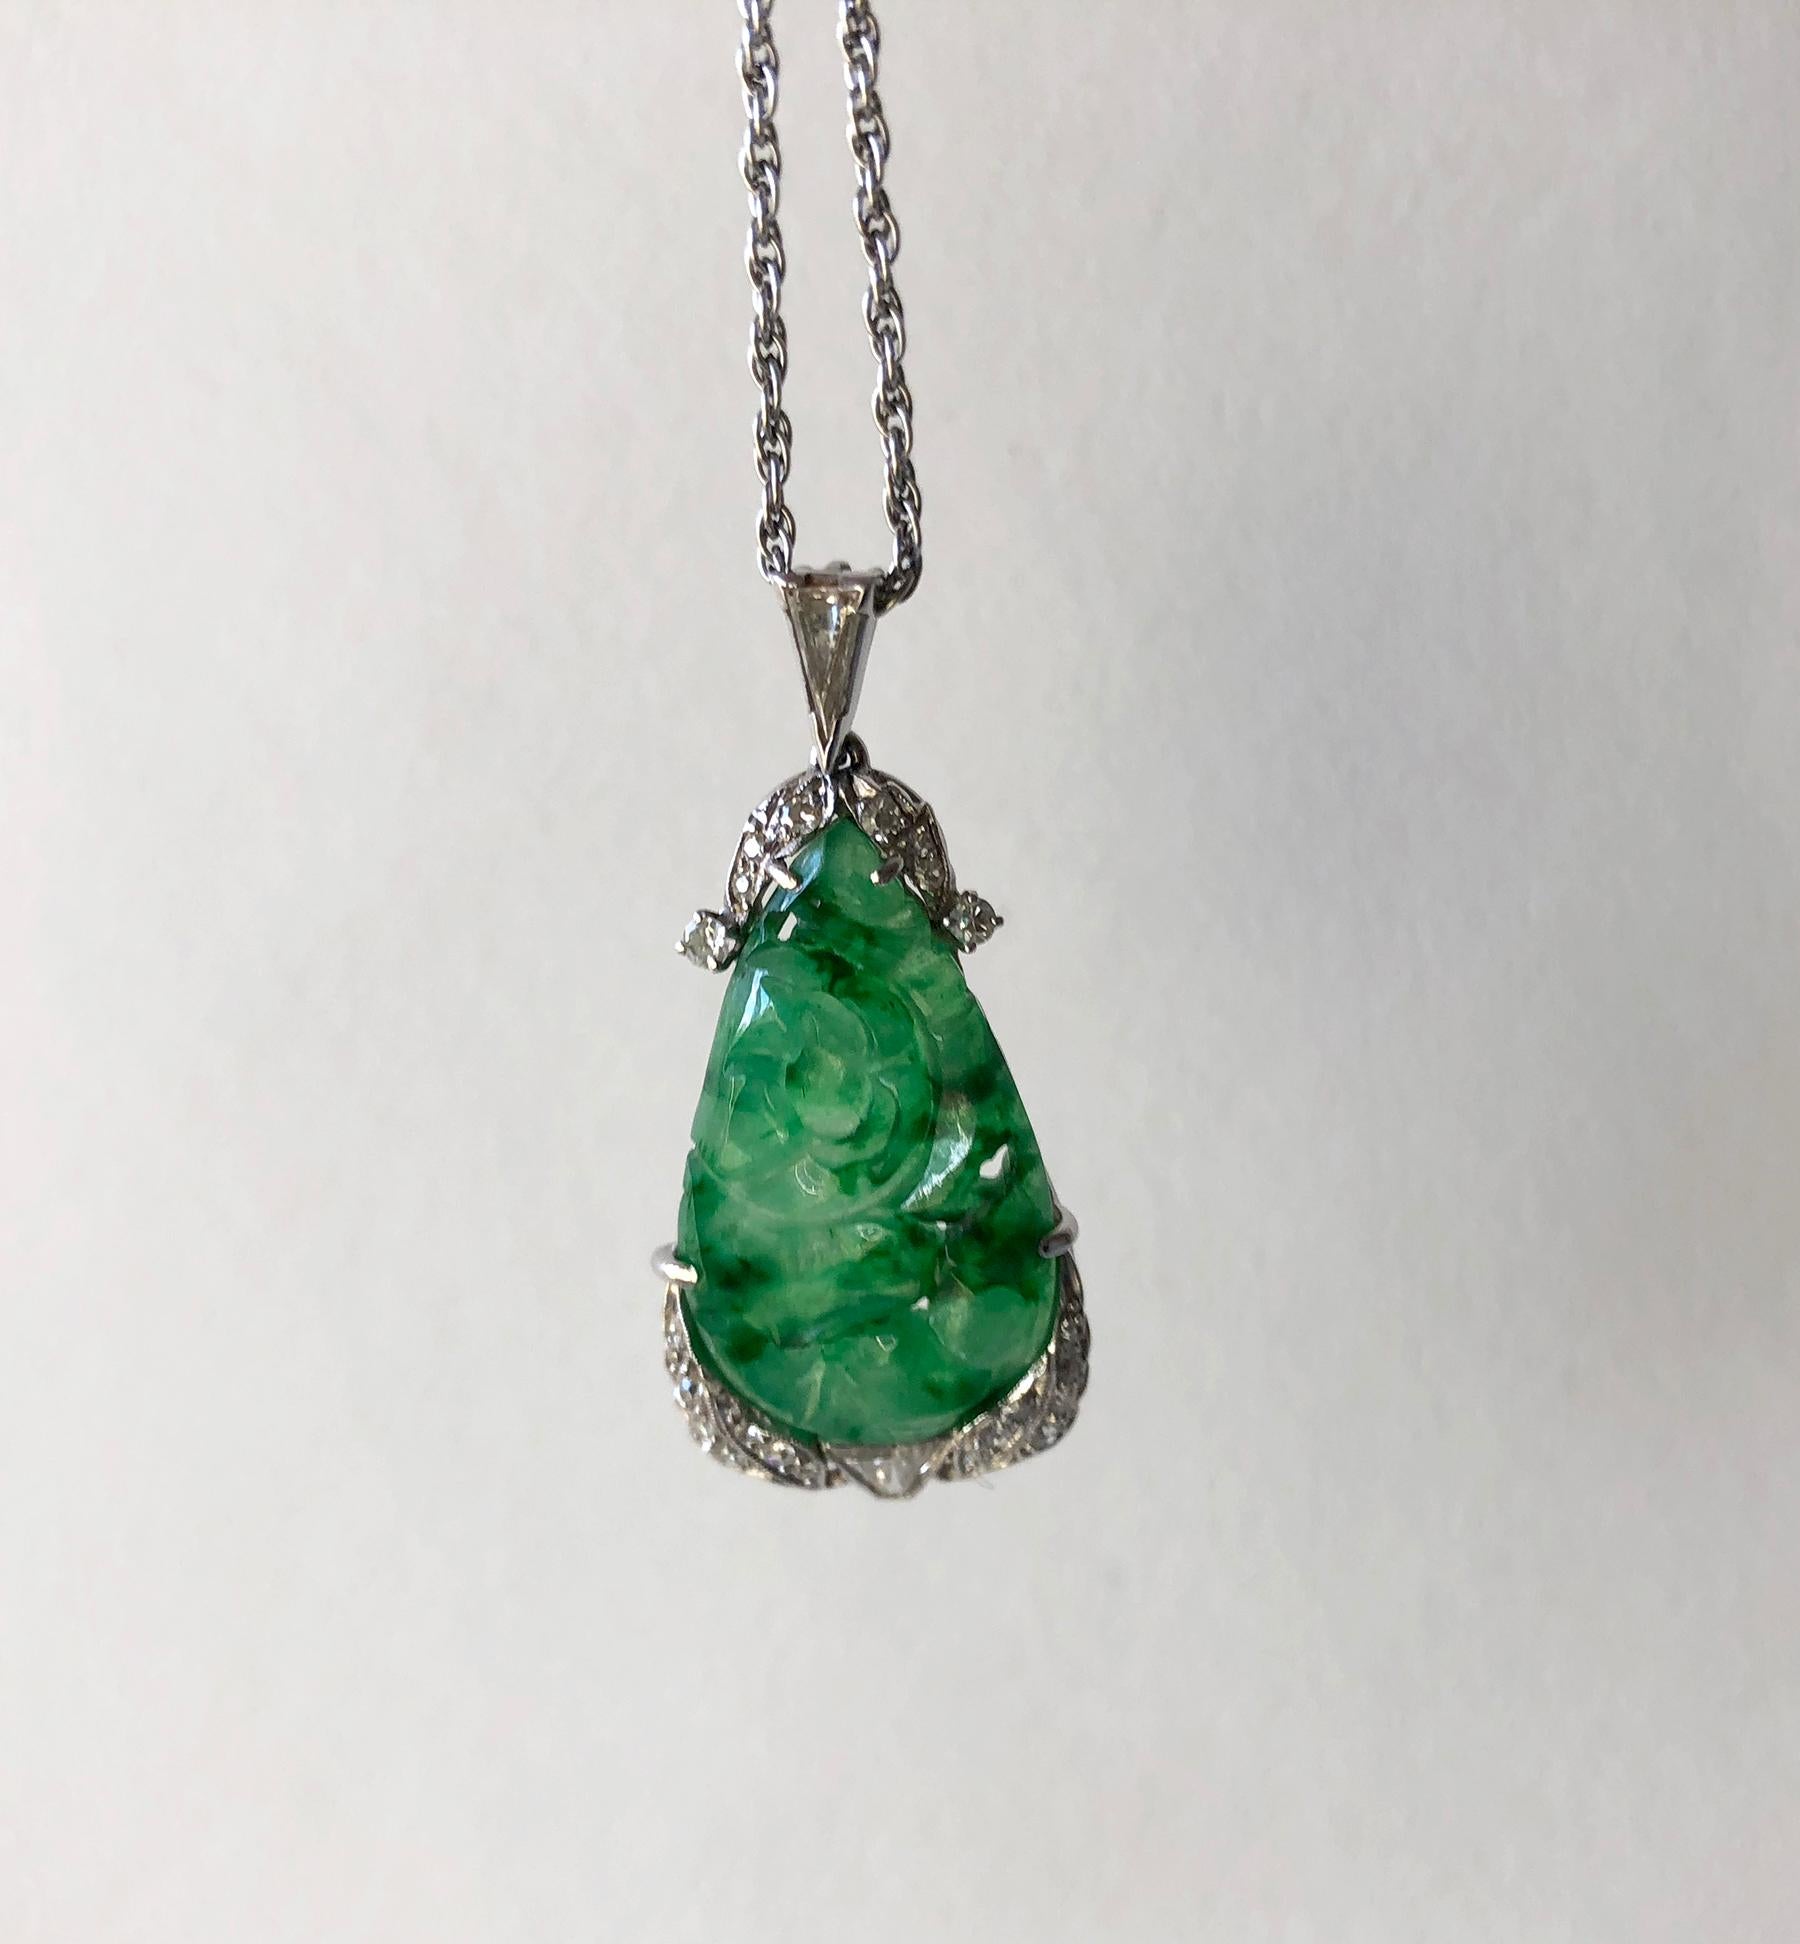 1950's demi parure consisting of carved jade and diamonds set in 14K white gold.  Pendant measures 1.5